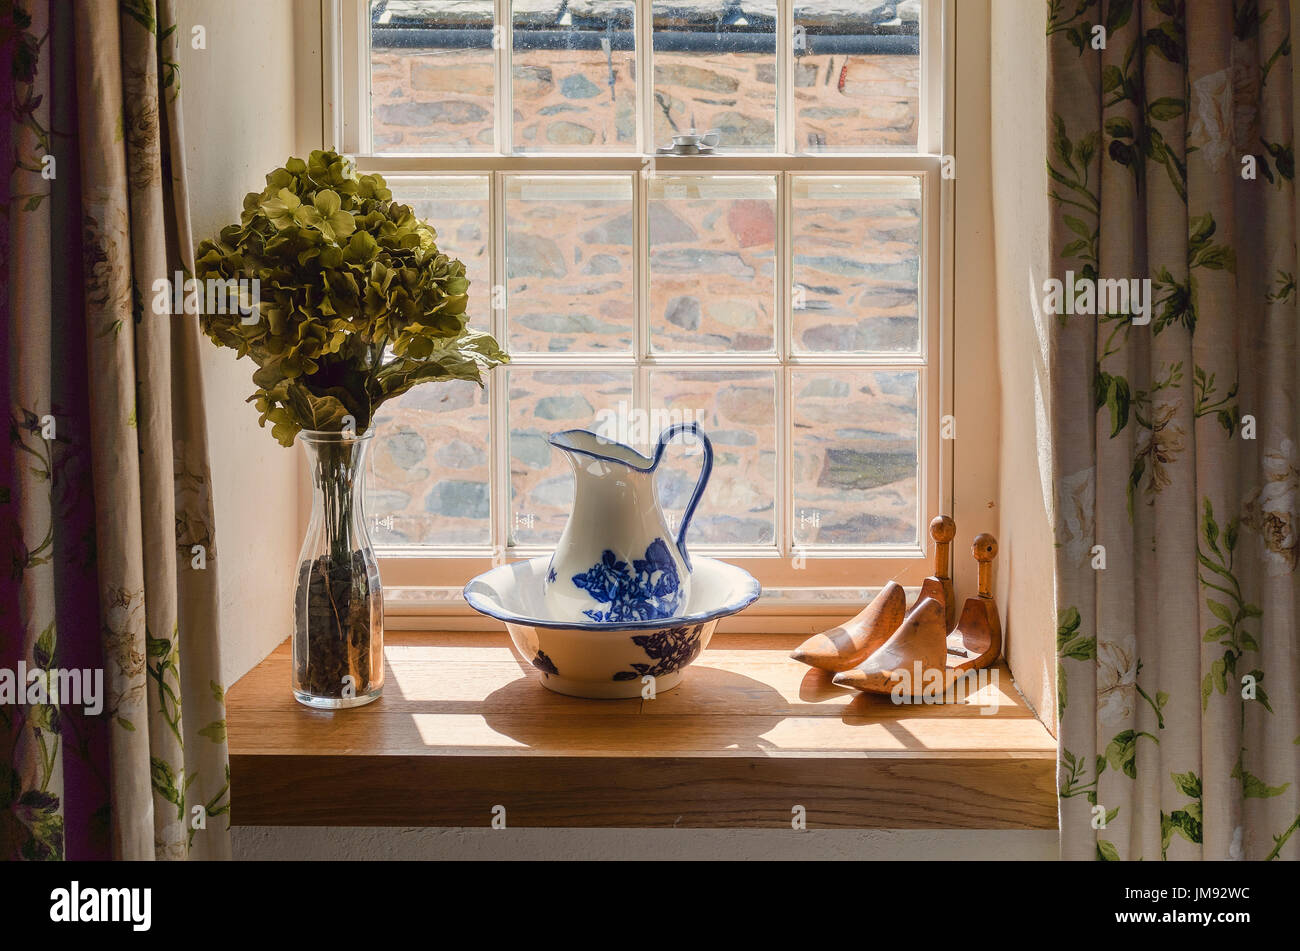 Still life window decor in a Cumbrian holiday home UK showing old washing bowl and a pair of wooden lasts Stock Photo